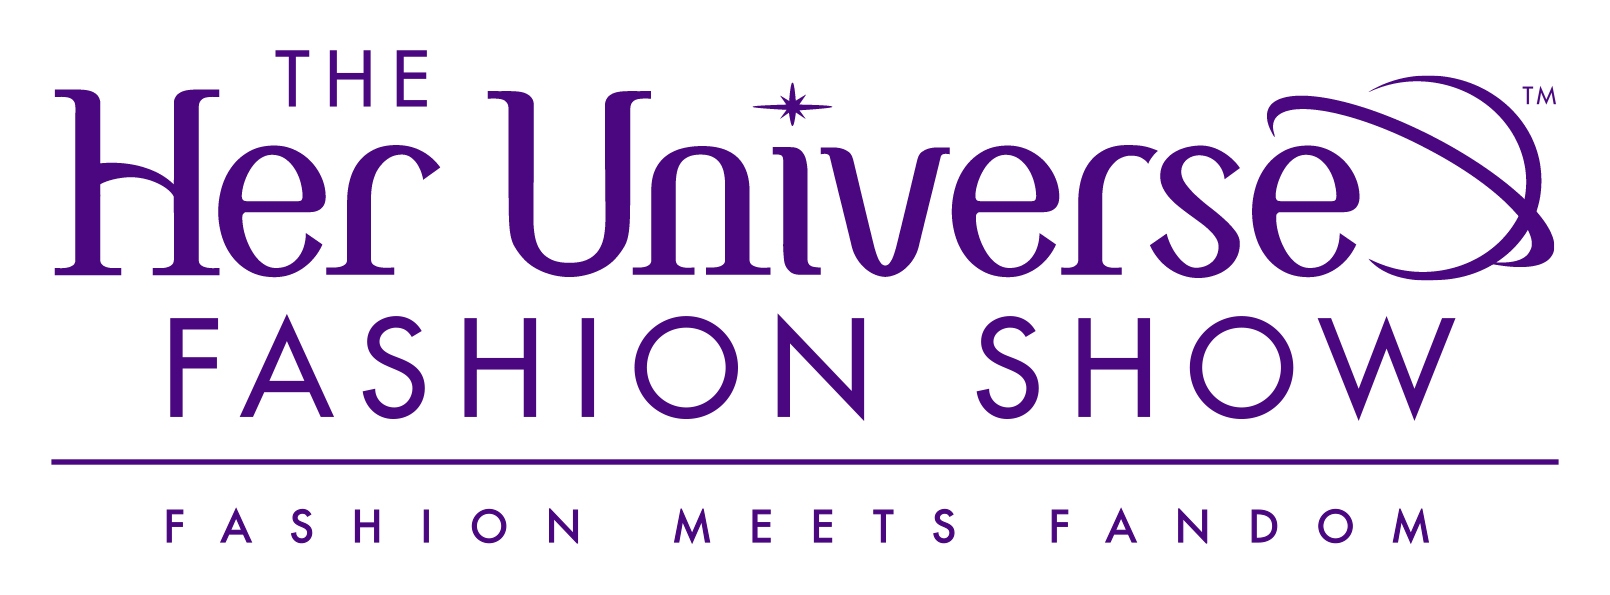 A brand new docu-series, The Her Universe Fashion Show: Fashion Meets Fandom premieres TODAY exclusively on Comic-Con HQ - - the new digital network and streaming video-on-demand destination for SDCC.